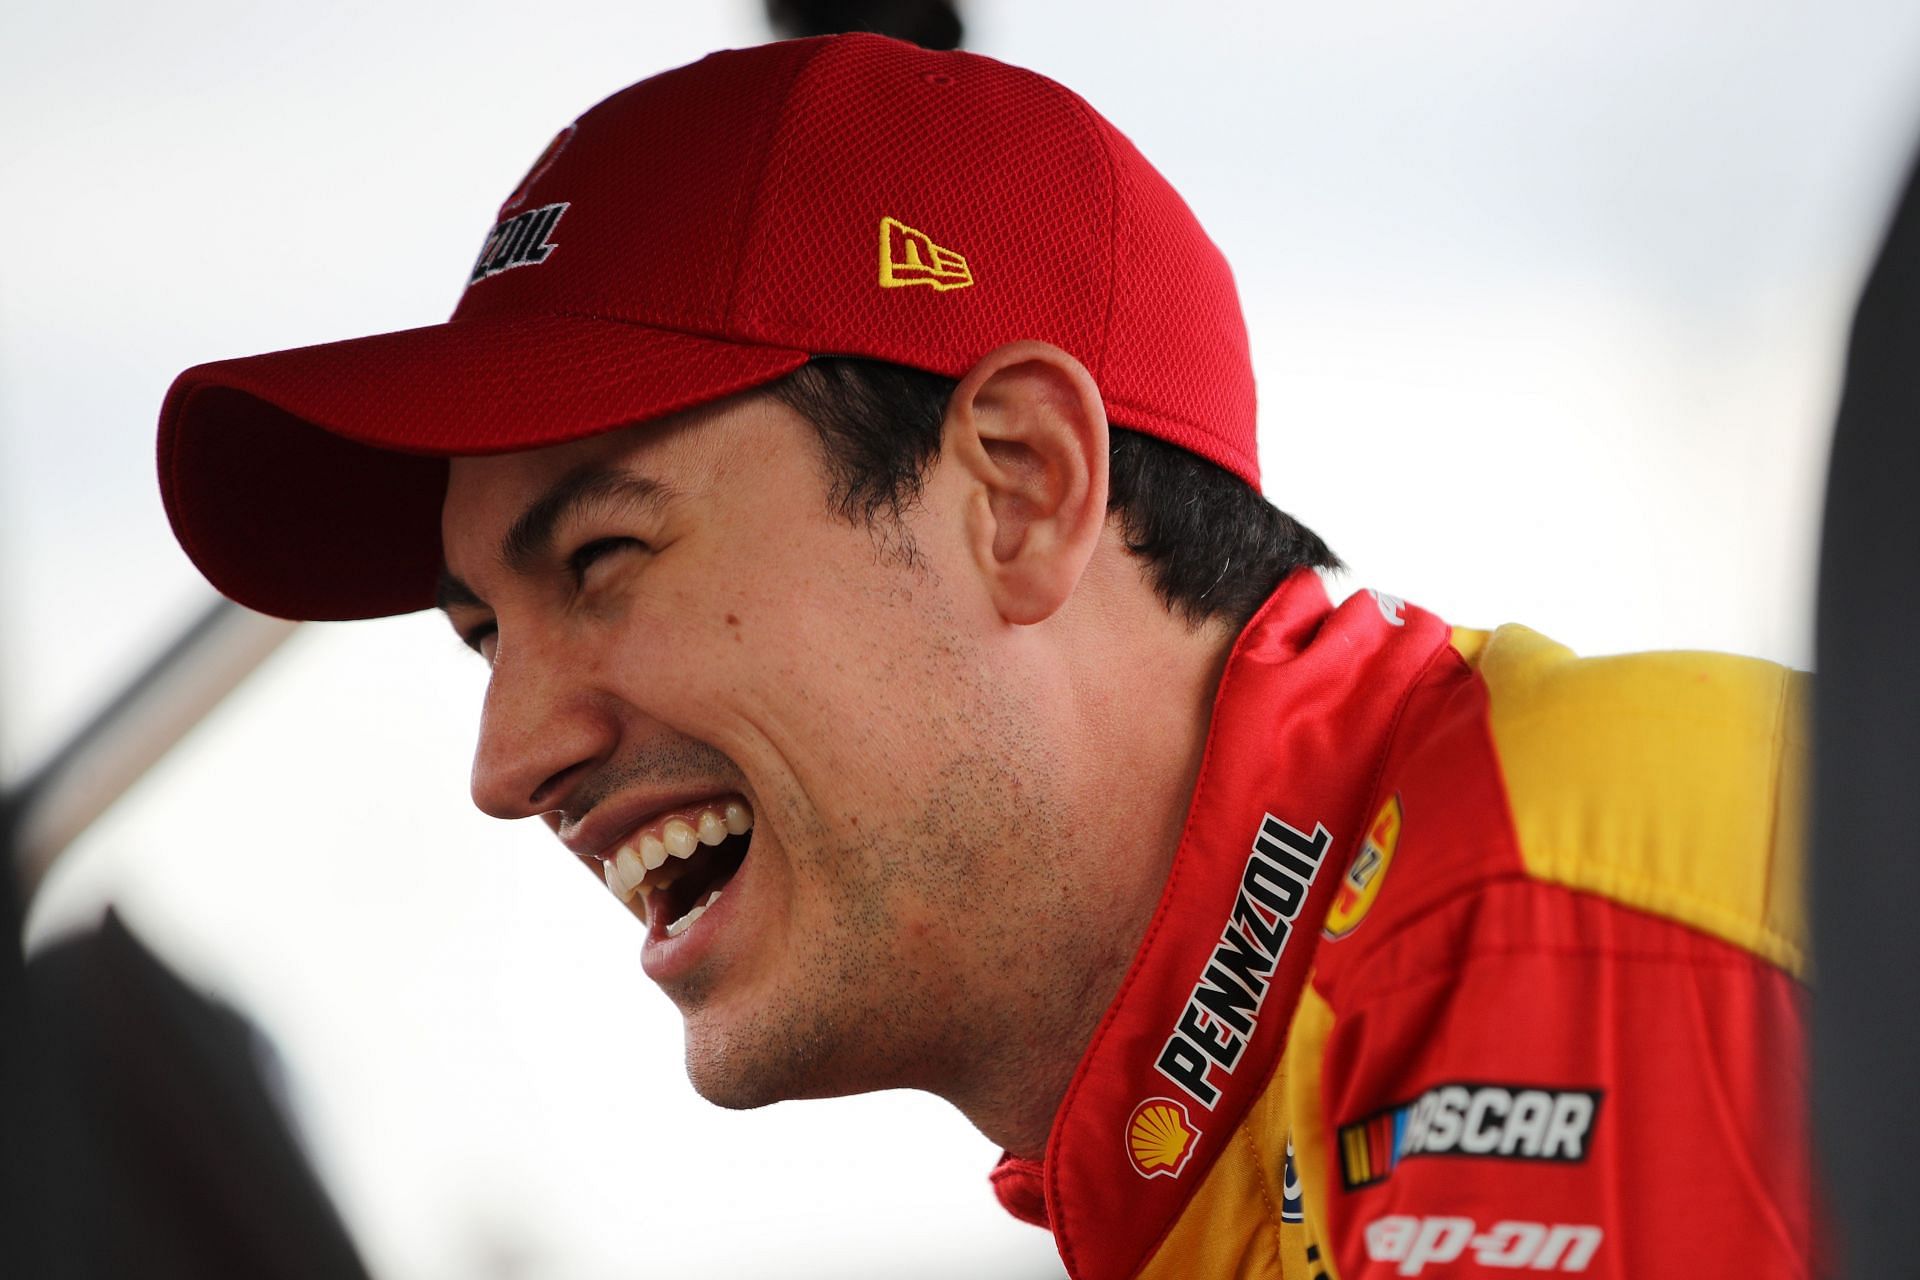 Joey Logano laughs on the grid during practice for the NASCAR Cup Series Blue-Emu Maximum Pain Relief 400 at Martinsville Speedway.